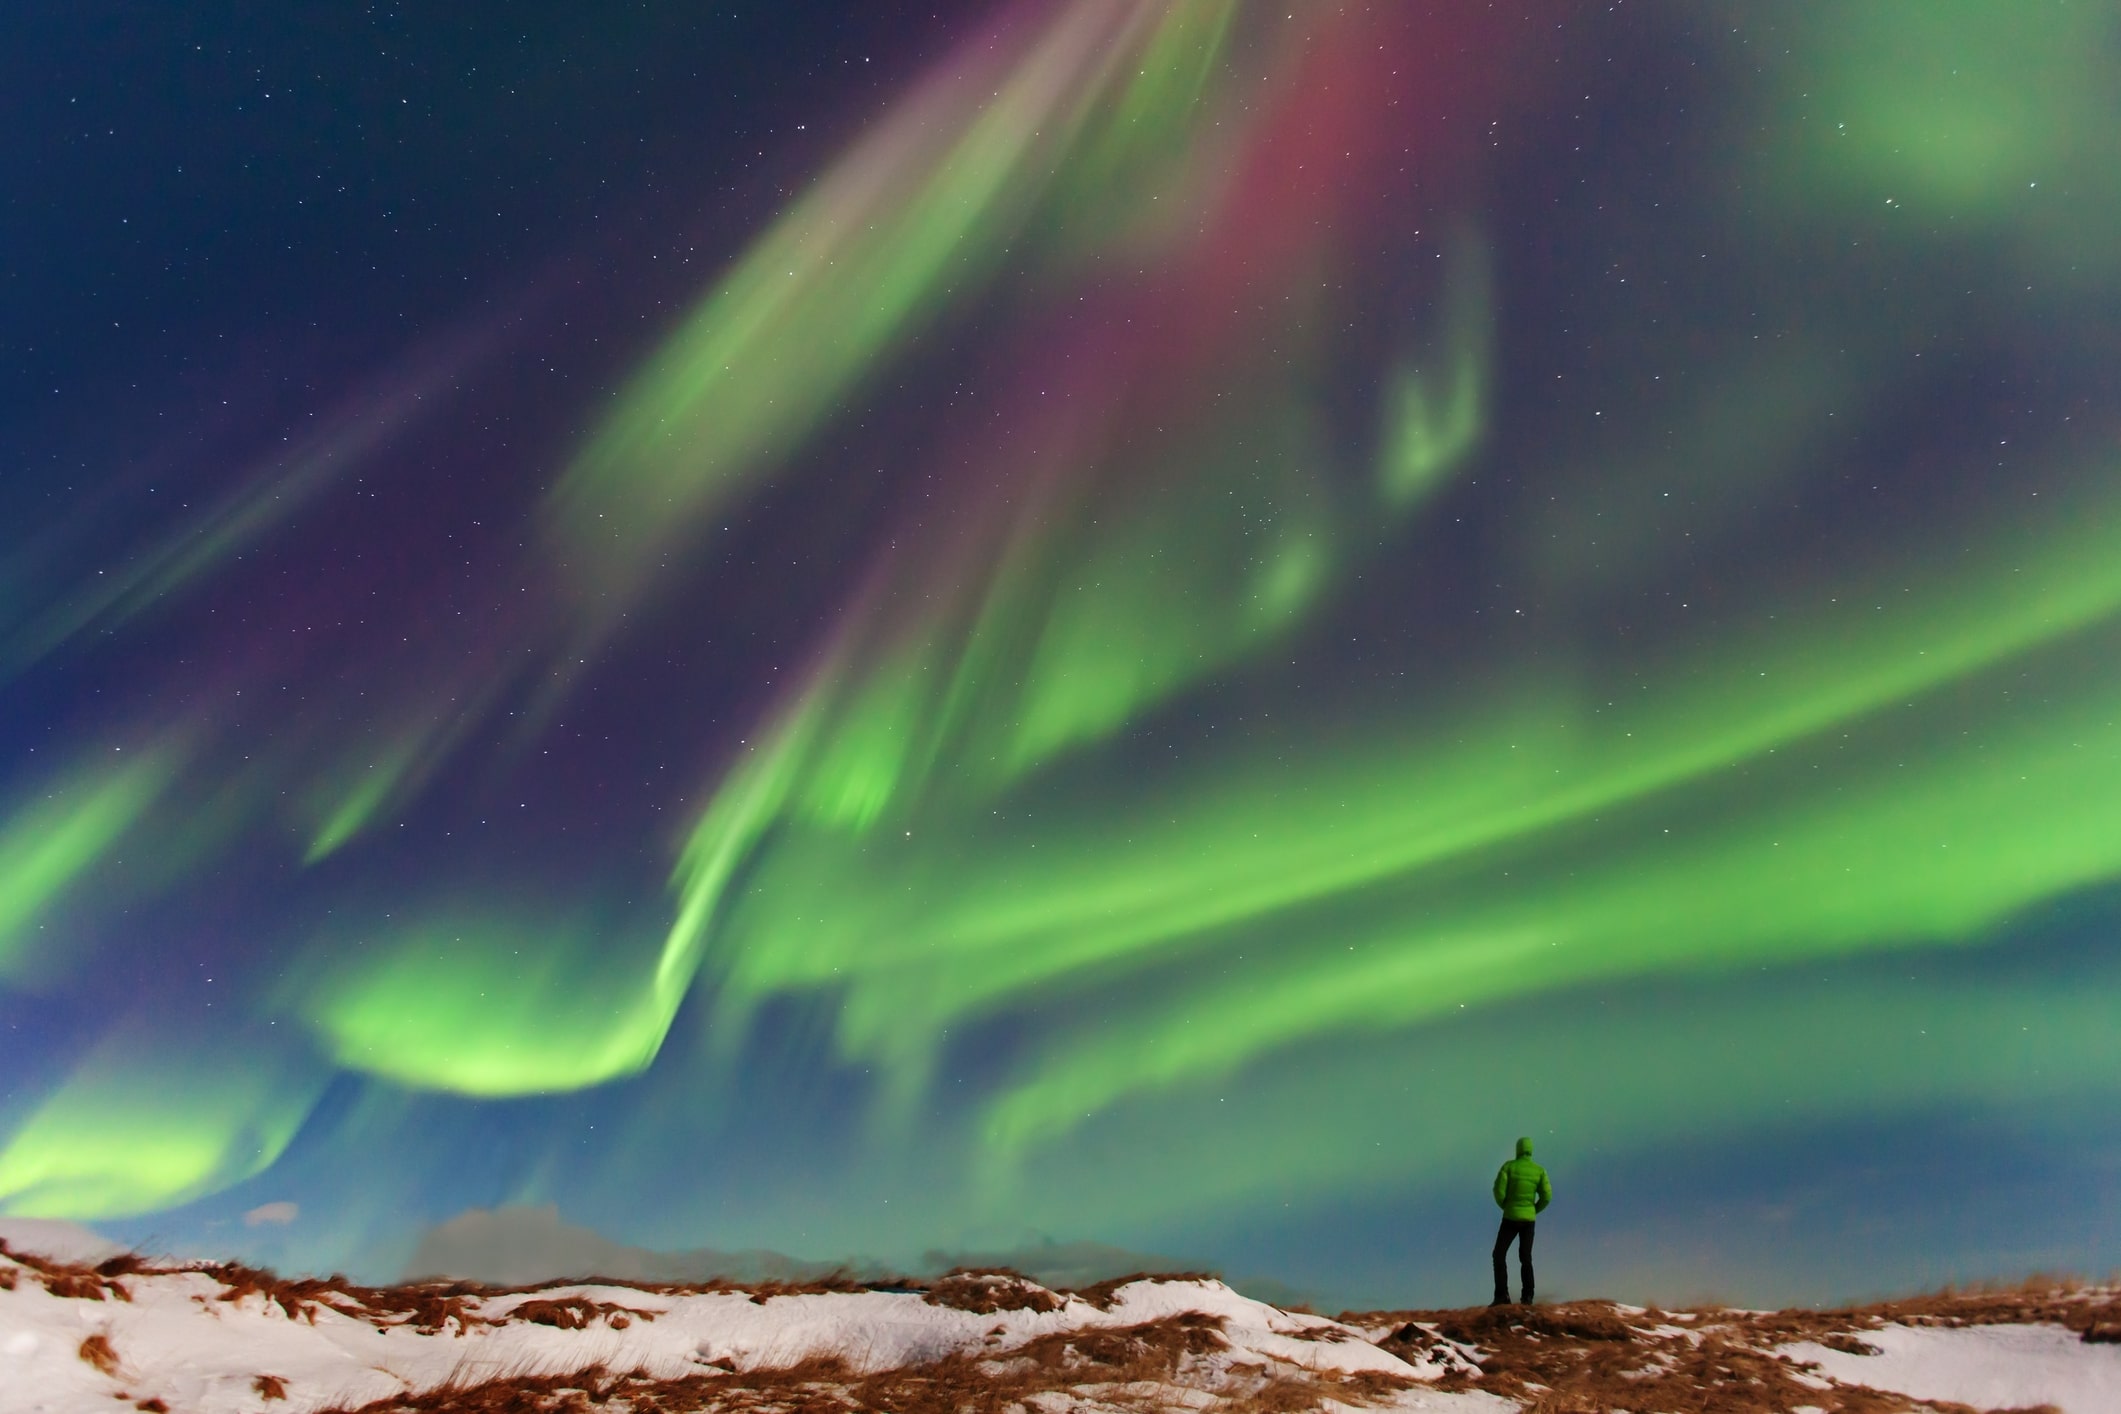 man admiring the northern lights in iceland